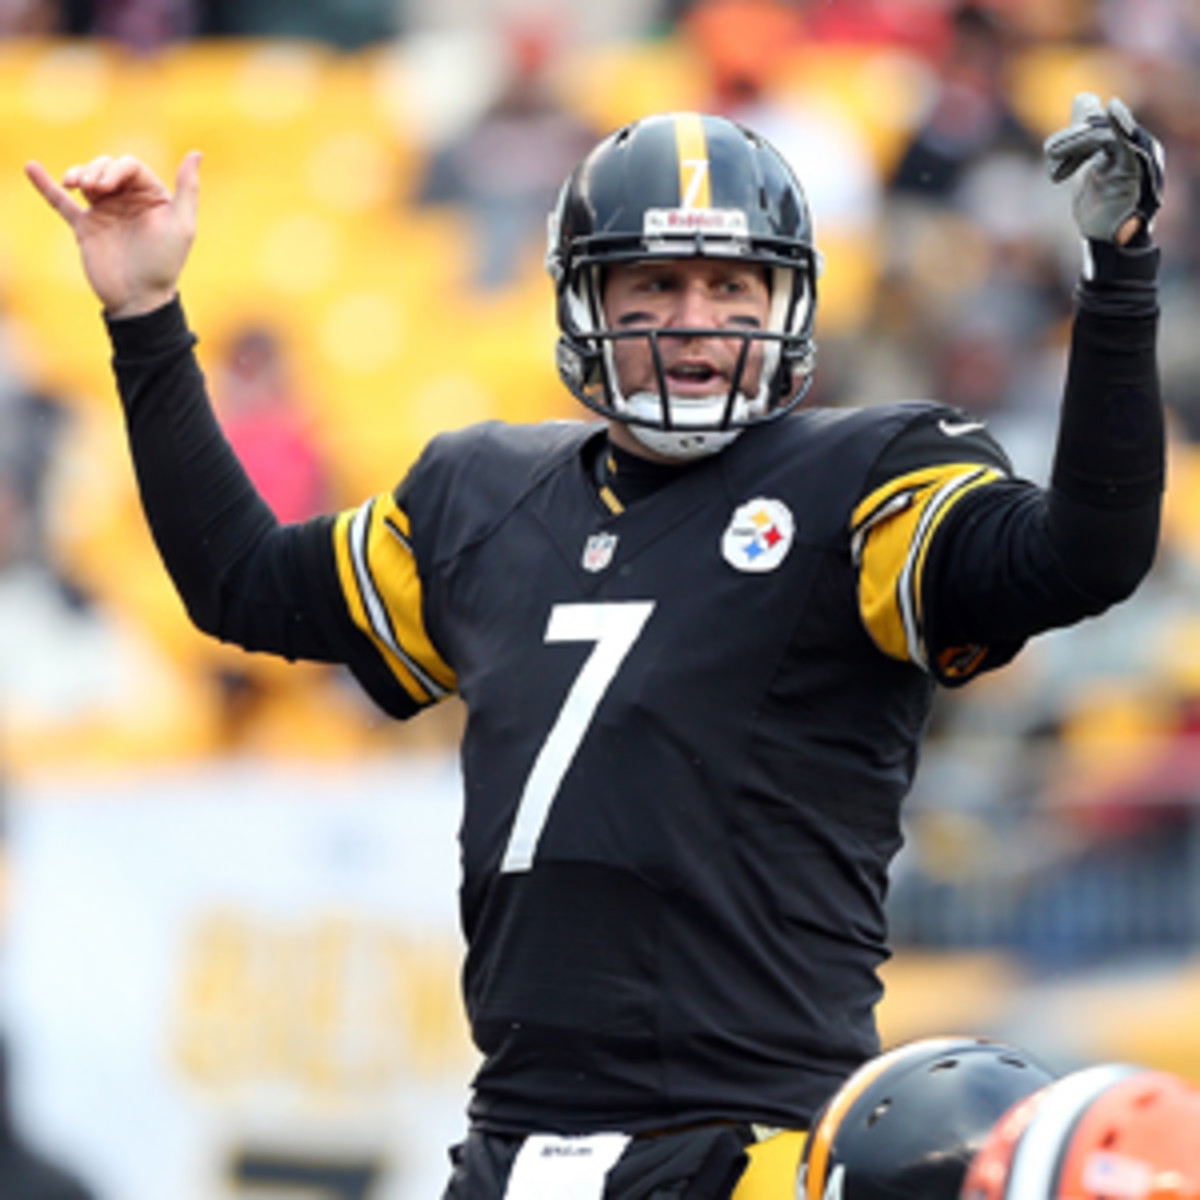 Ben Roethlisberger is on the books for the fourth highest NFL quarterback salary in 2013. (Karl Walter/Getty Images)